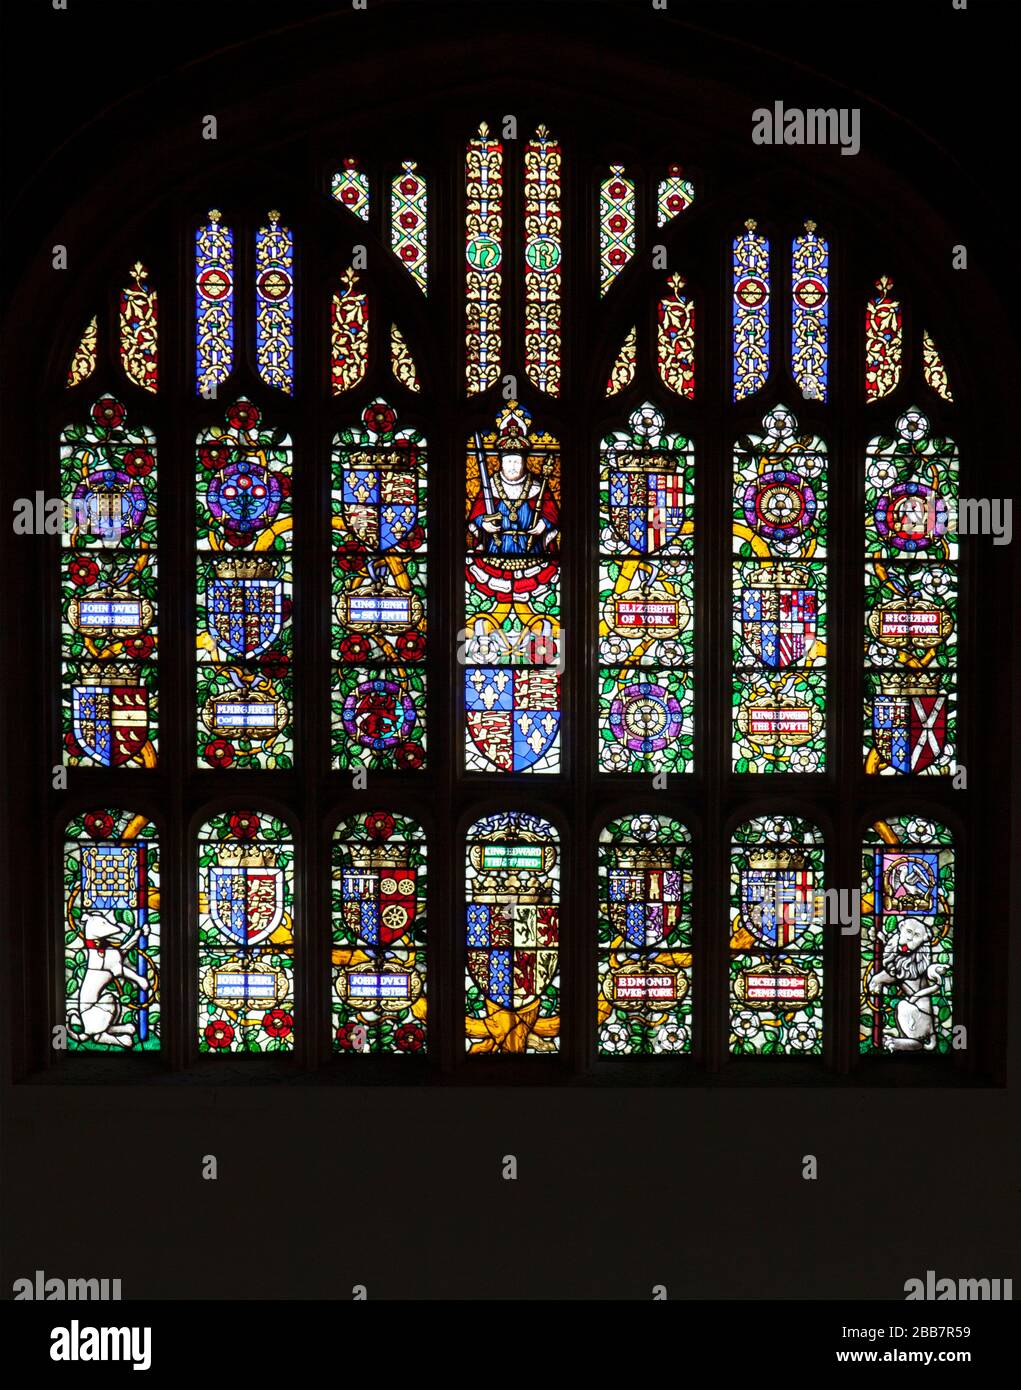 Stained Glass window, Great Hall, Hampton Court Palace, Richmond Upon Thames, Surrey, Borough of London, England. Stock Photo